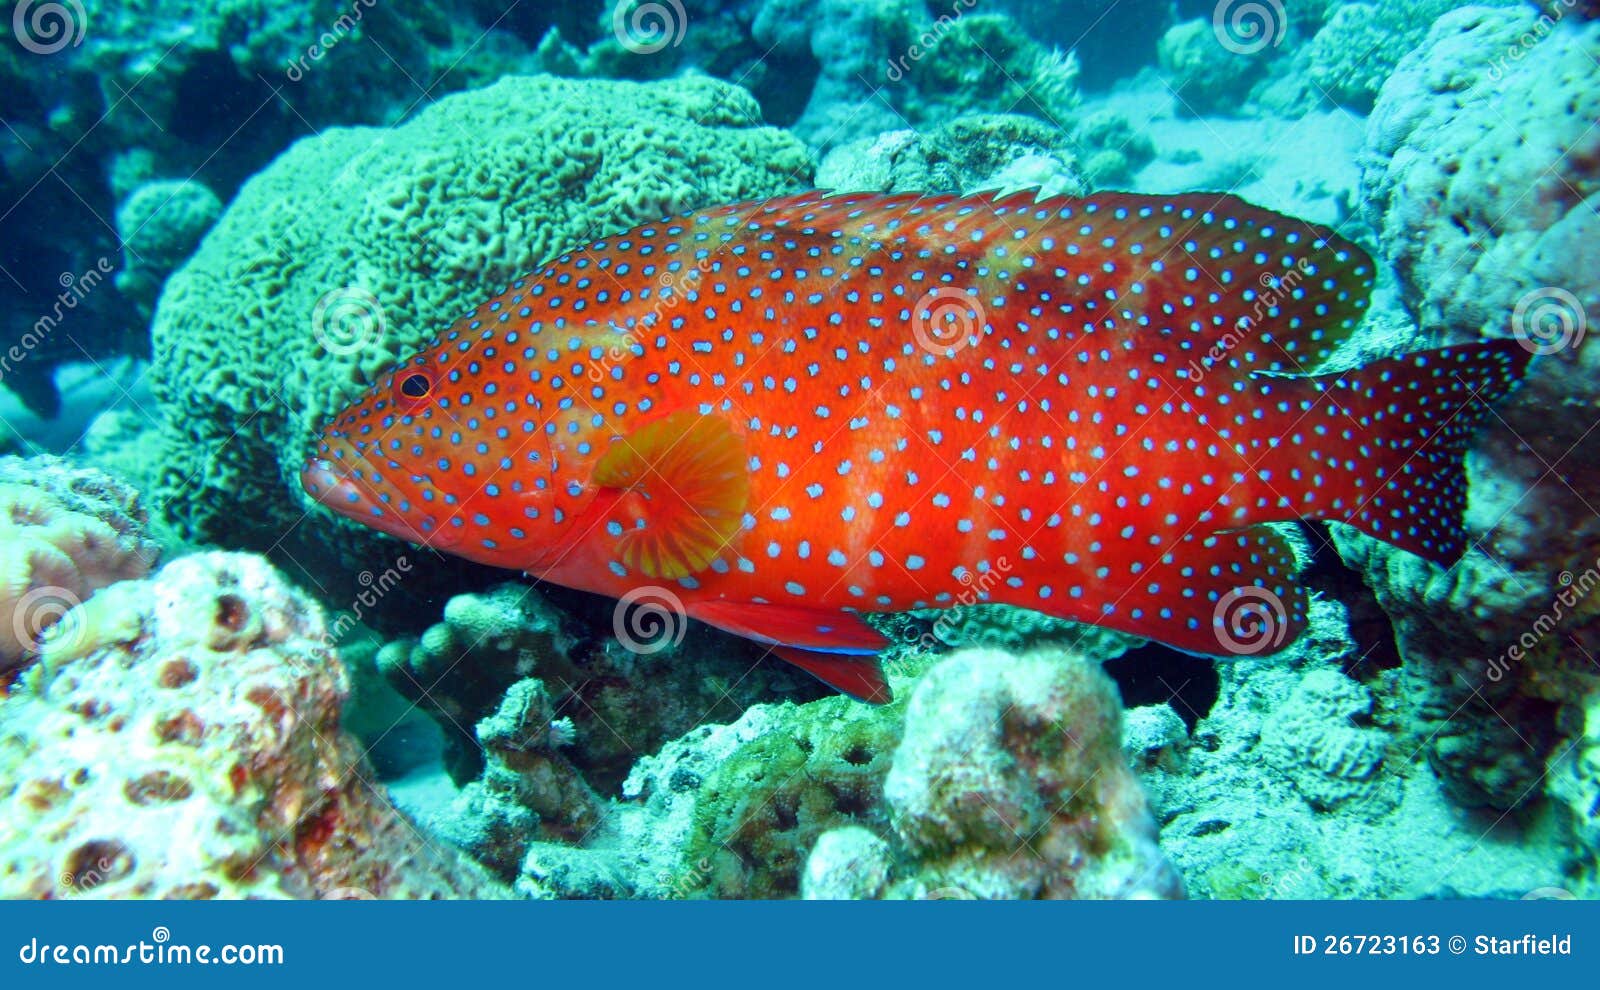 Free Images : sea, water, diving, yellow, coral reef, egypt, aquarium ...